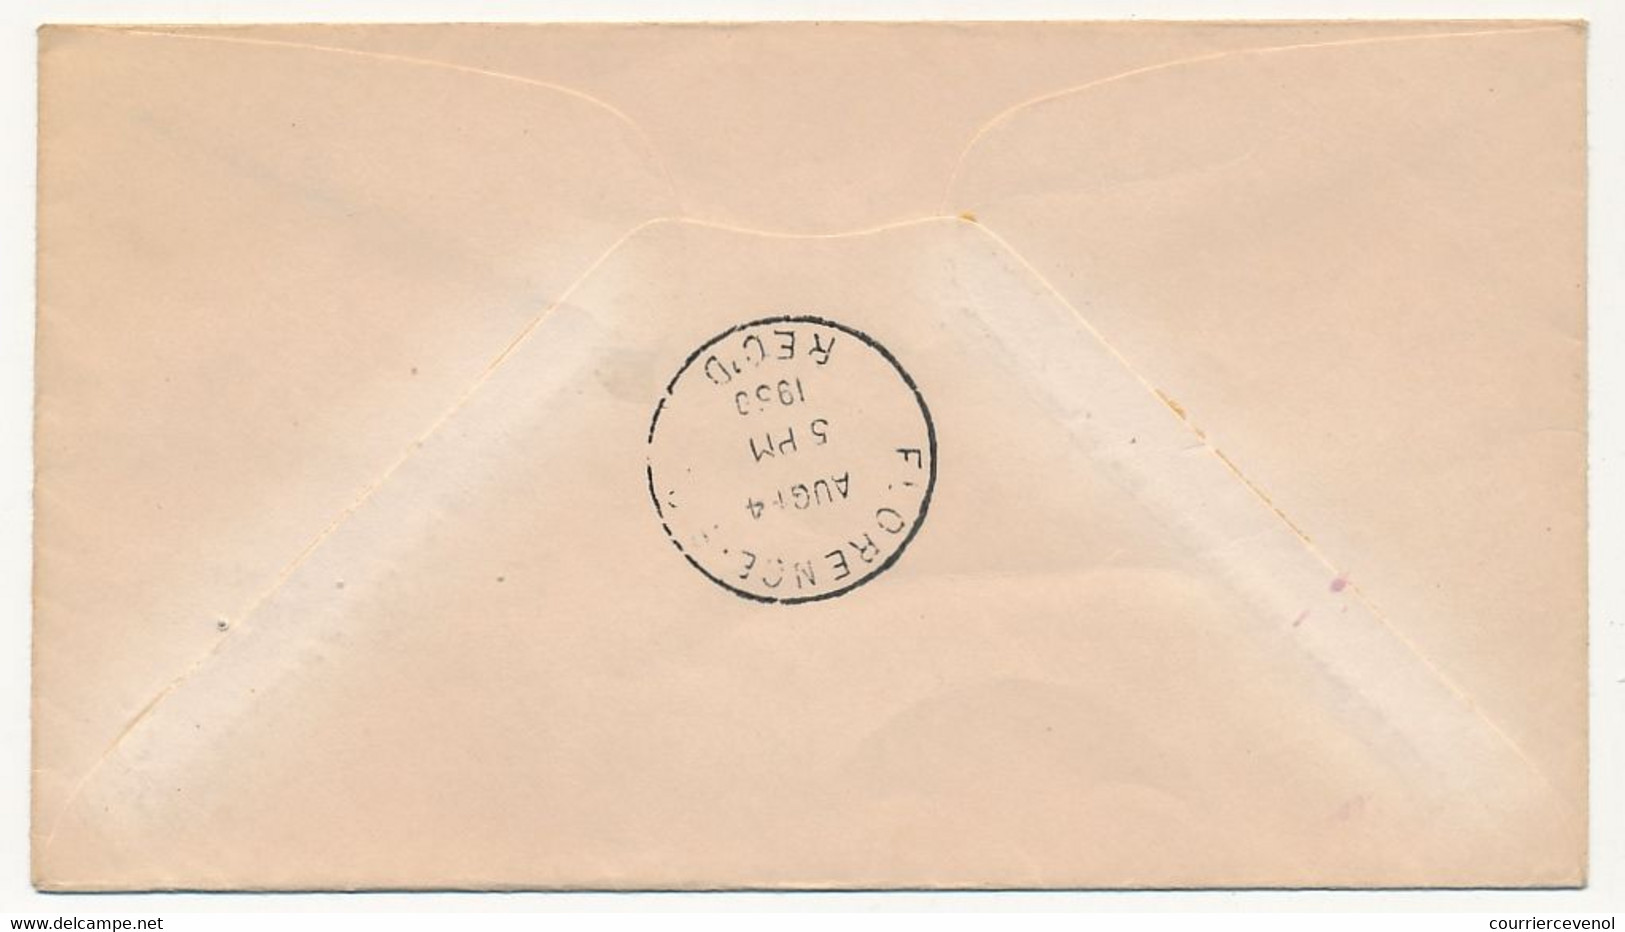 Etats Unis - First Trip Highway Post Office - FAYETTEVILLE, N.C. & FLORENCE, S.C. - 14 Aout 1950 - Briefe U. Dokumente